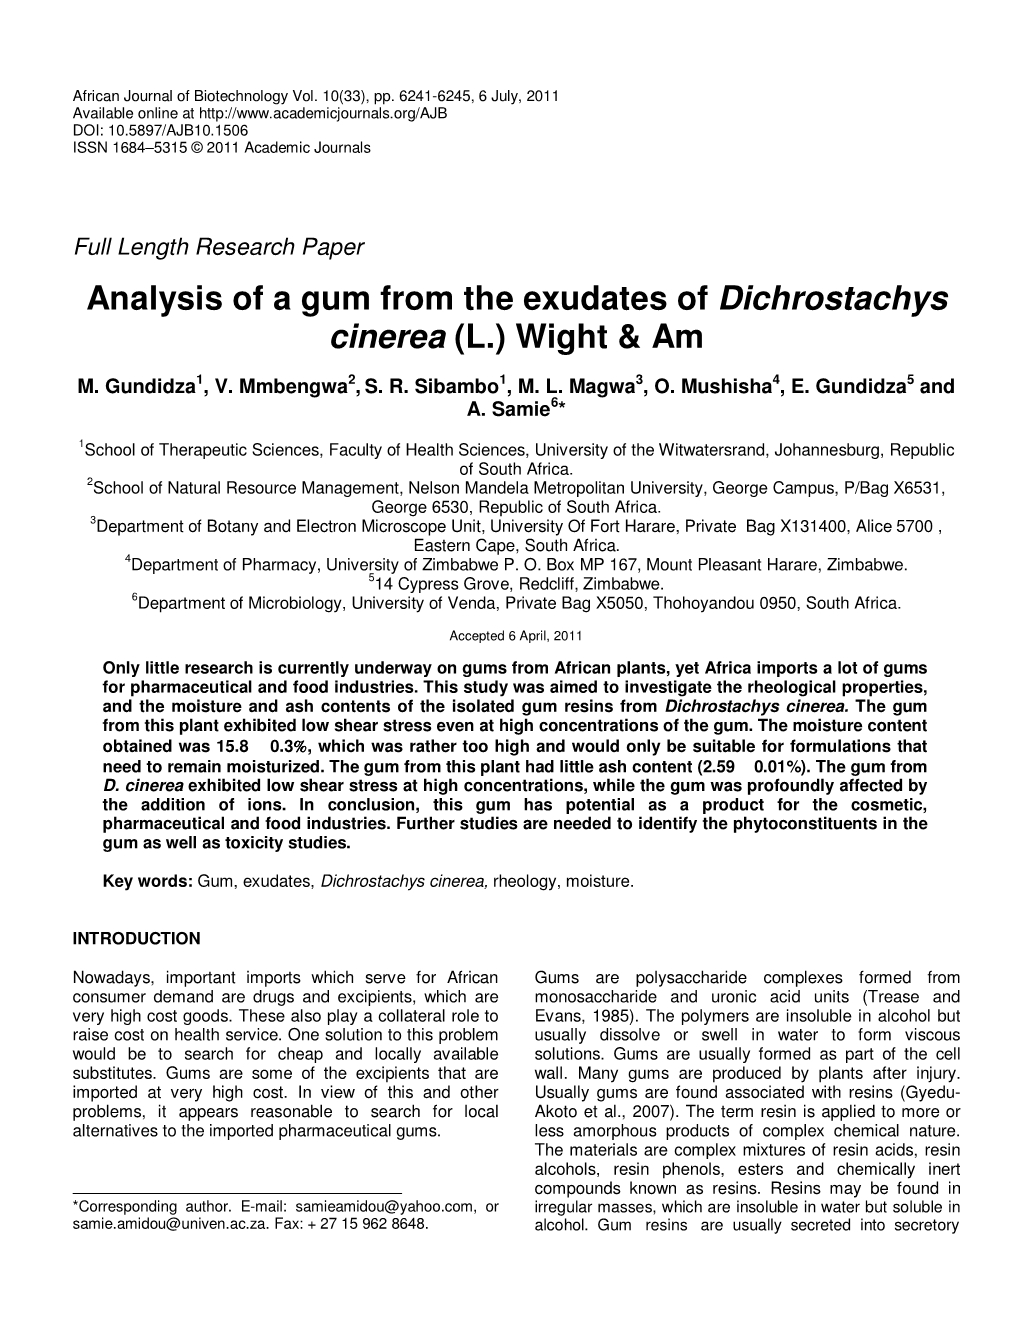 Analysis of a Gum from the Exudates of Dichrostachys Cinerea (L.) Wight & Am